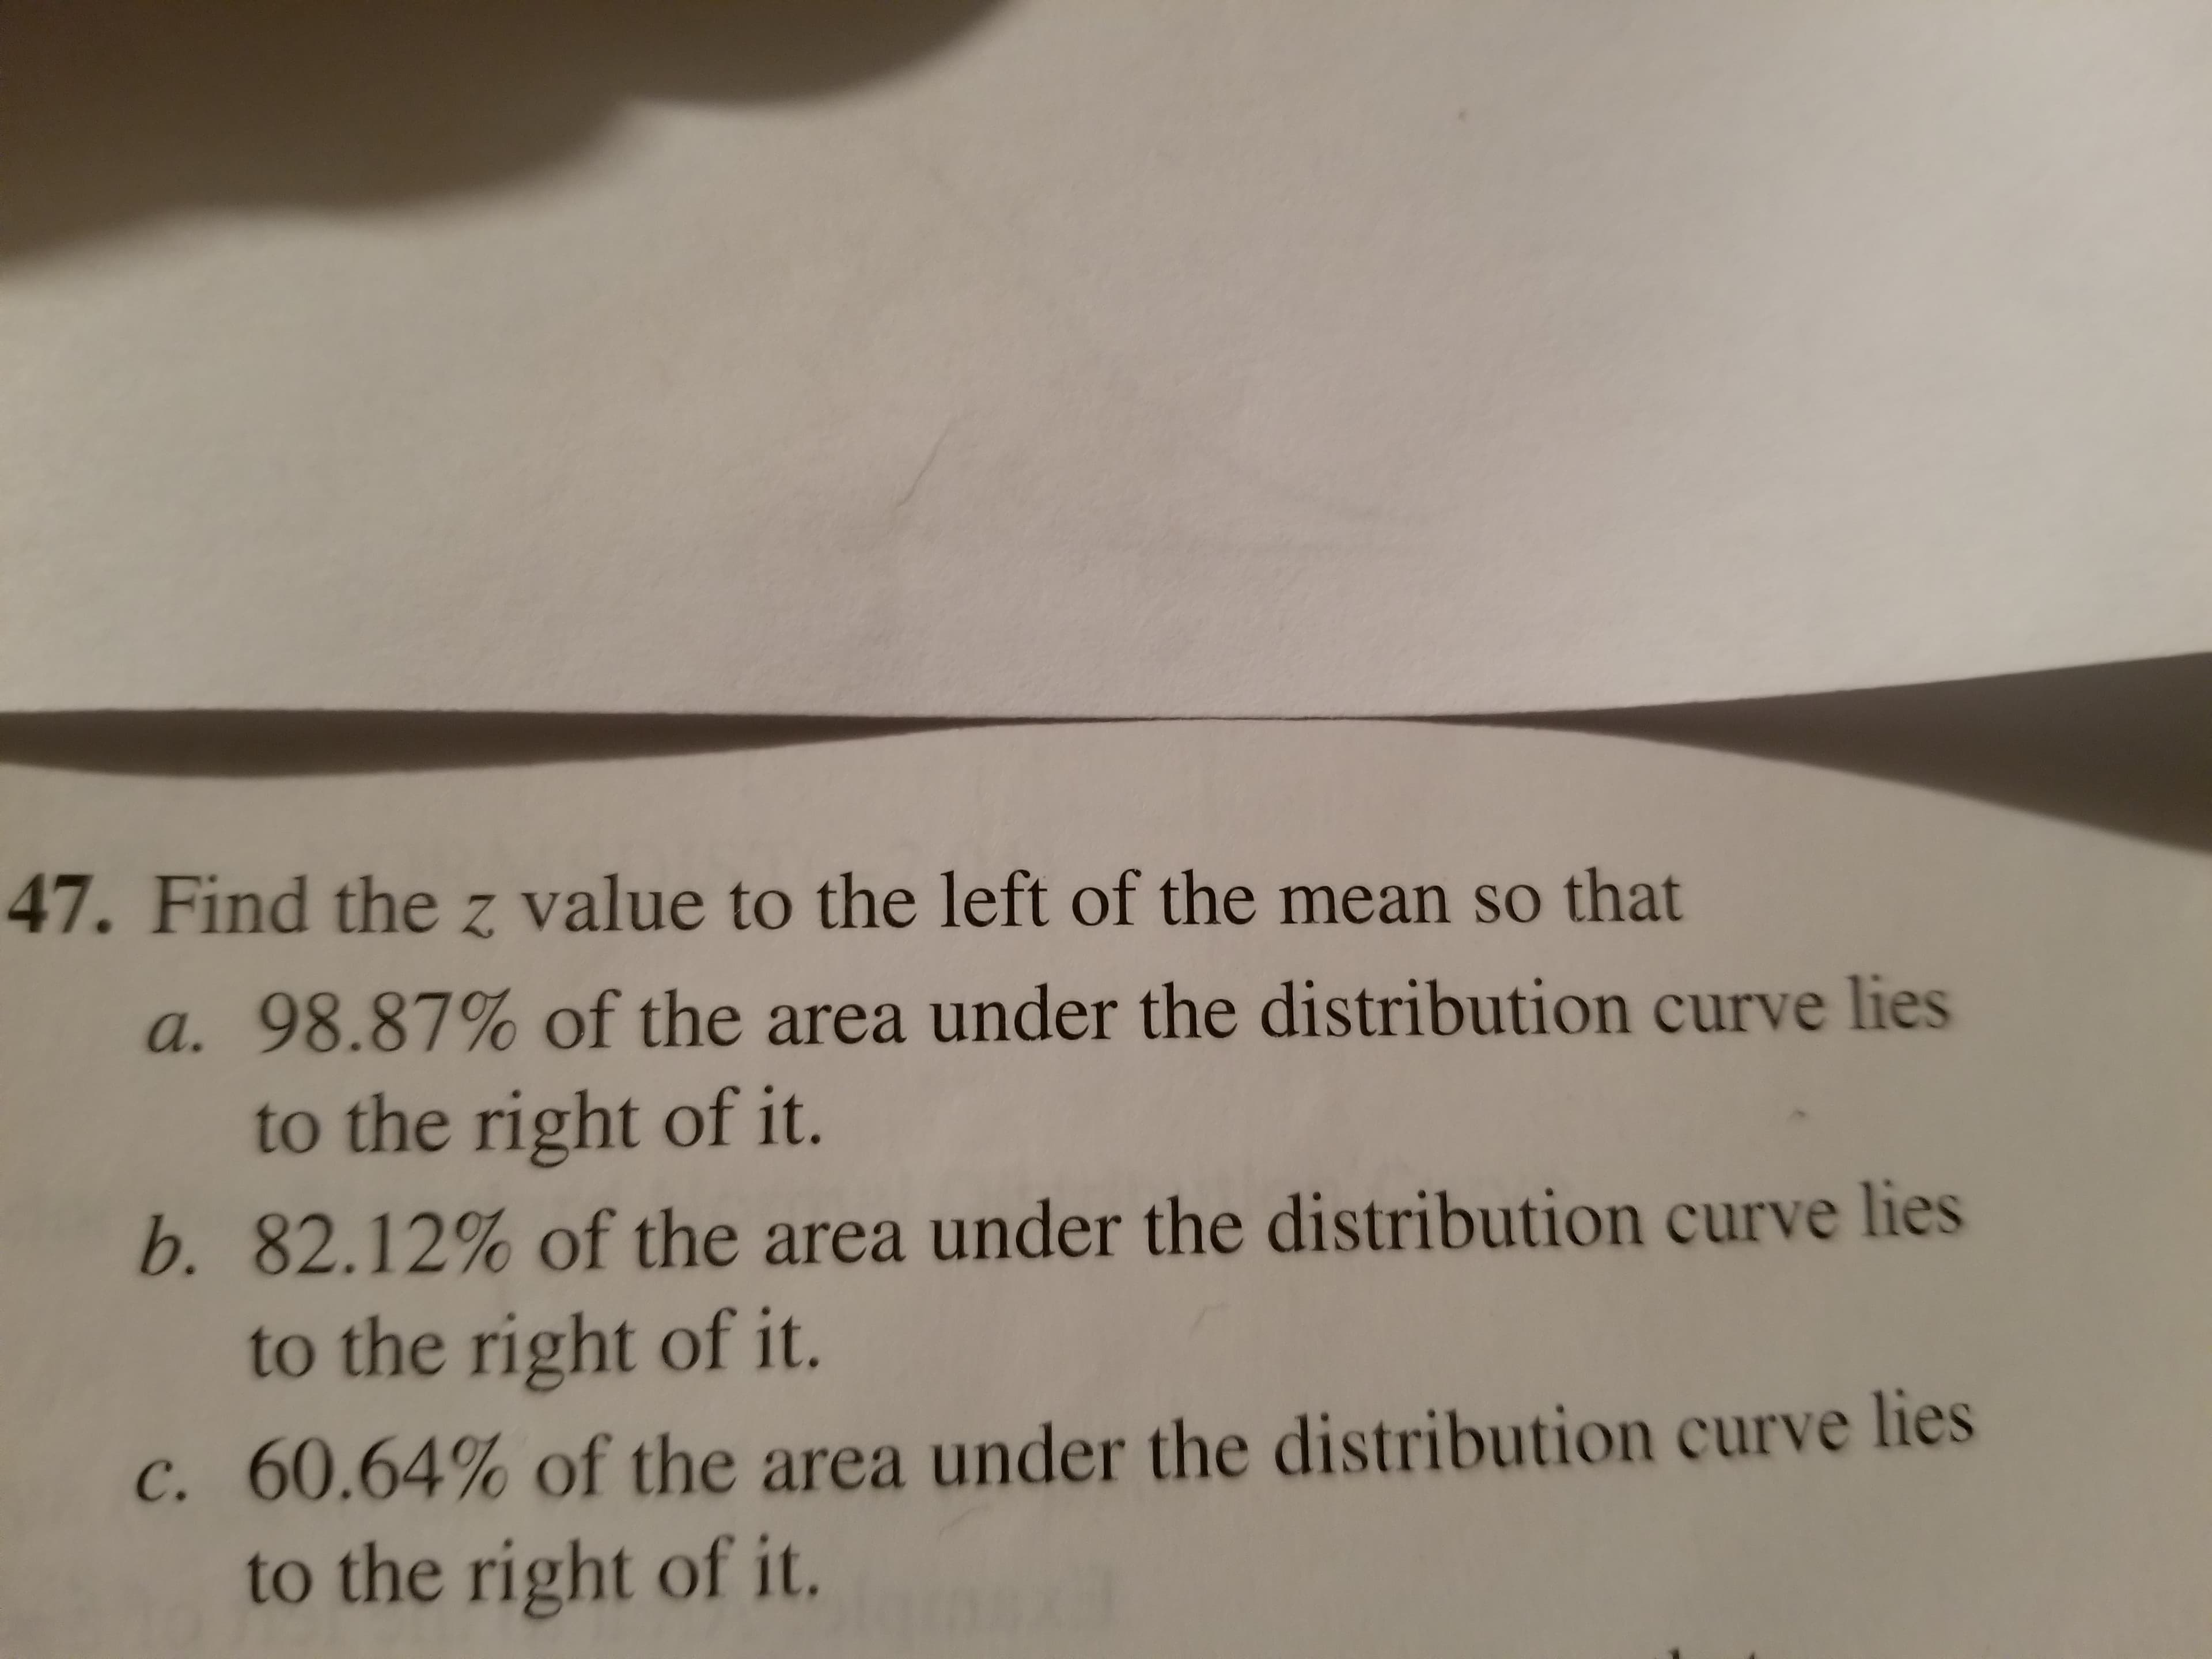 47. Find the z value to the left of the mean so that
a. 98.87% of the area under the distribution curve lies
b. 82.12% of the area under the distribution curve lies
c, 60.64% of the area under the distribution curve lies
to the right of it.
to the right of it.
to the right of it.
